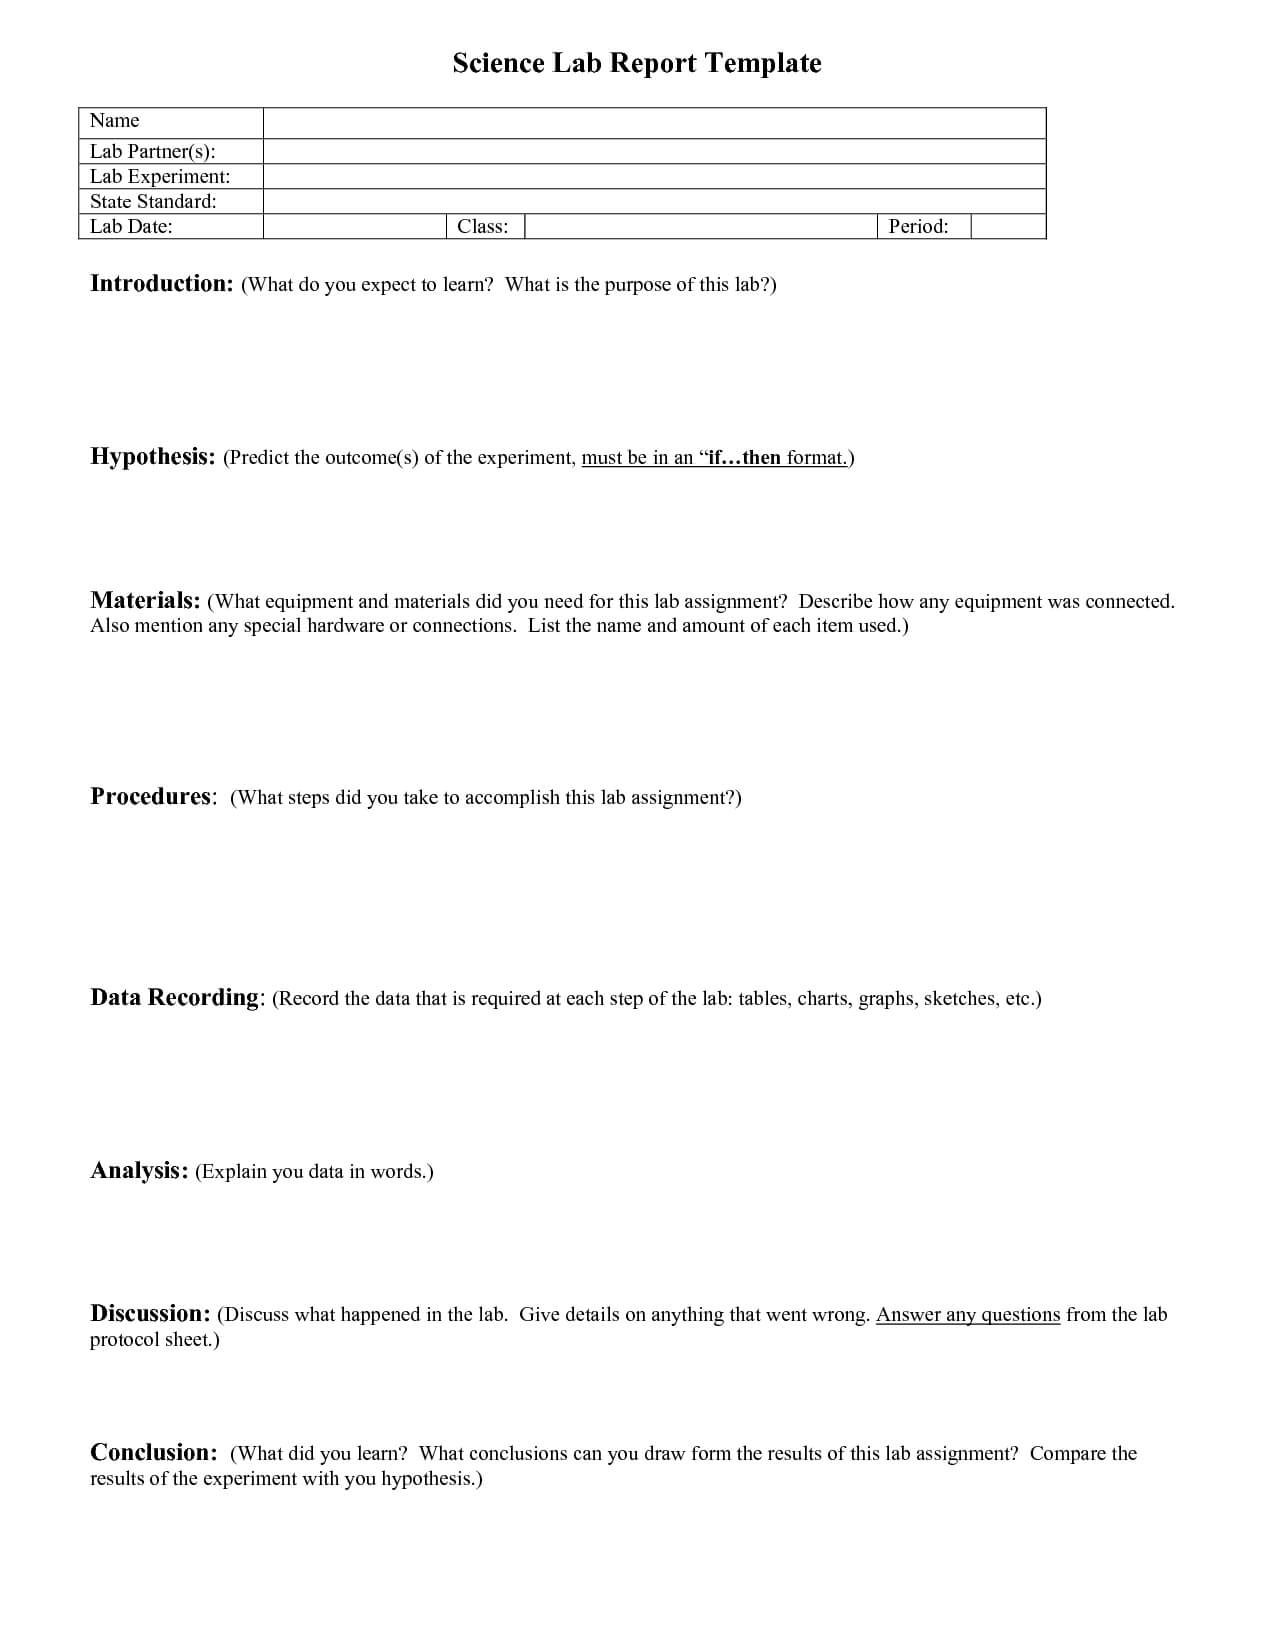 Lab Report Outline | Science Lab Report Template | Lab For Science Experiment Report Template